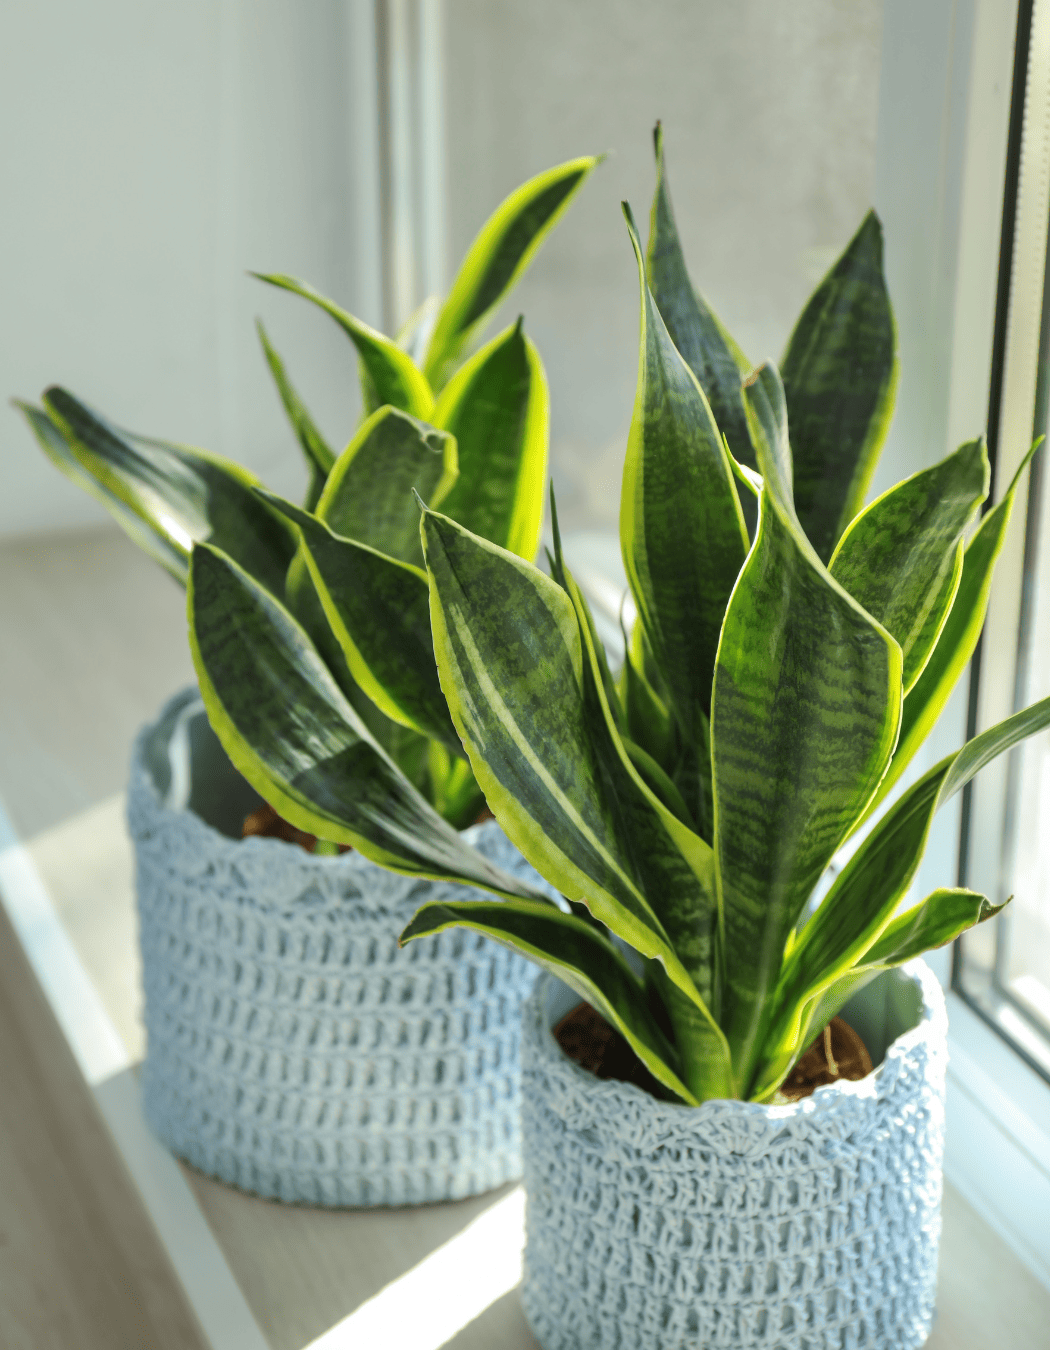 Hard-to-kill indoor plant featuring potted snake plant